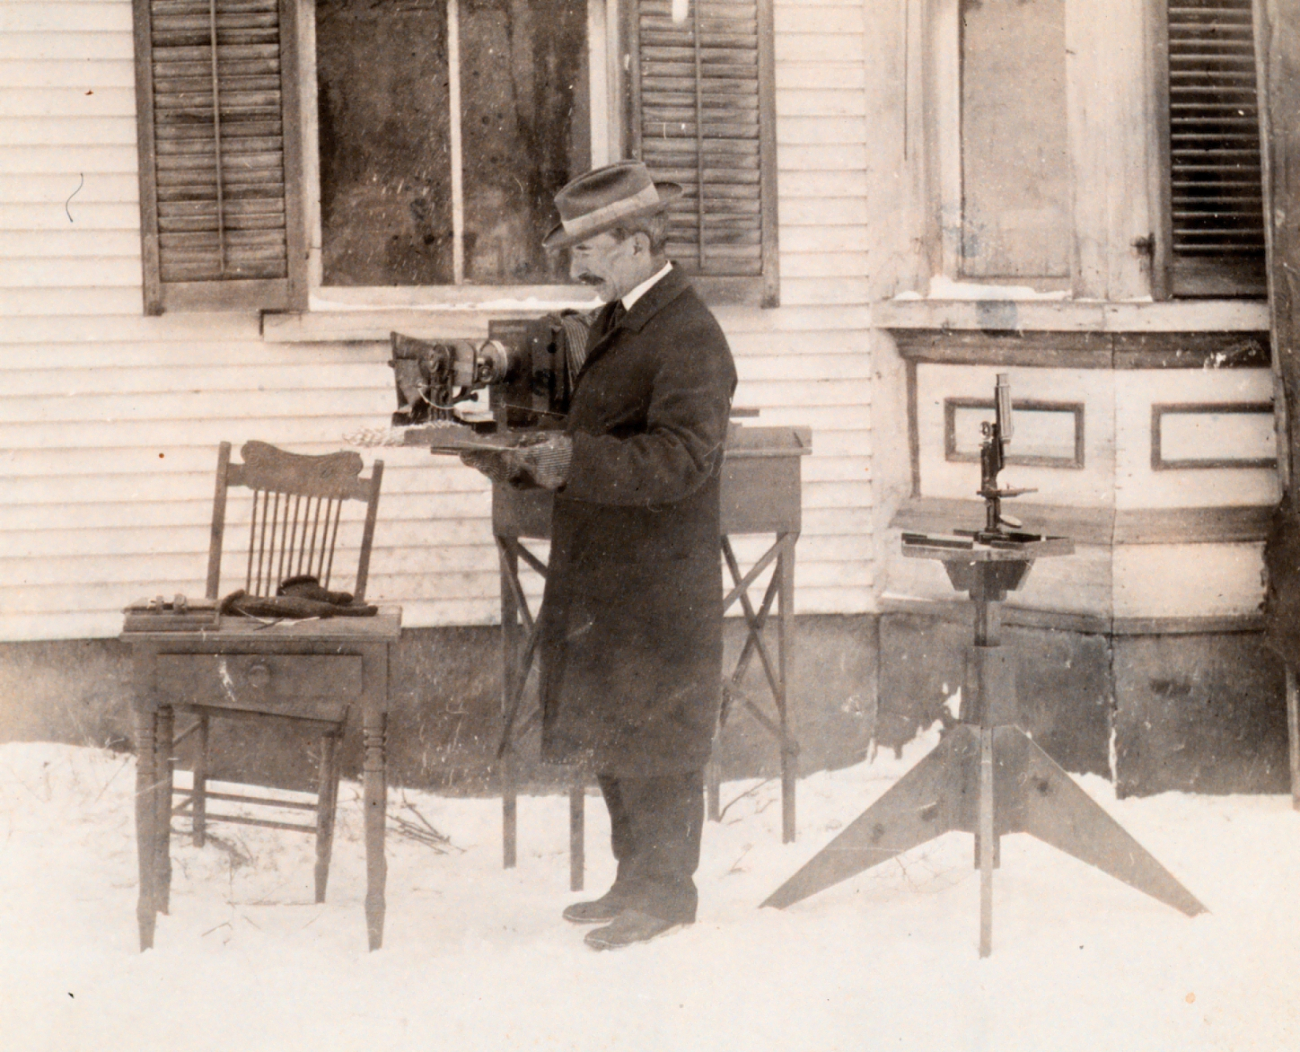 Wilson Bentley, the snowflake man, shown with his camera apparatus forphotographing snowflakes